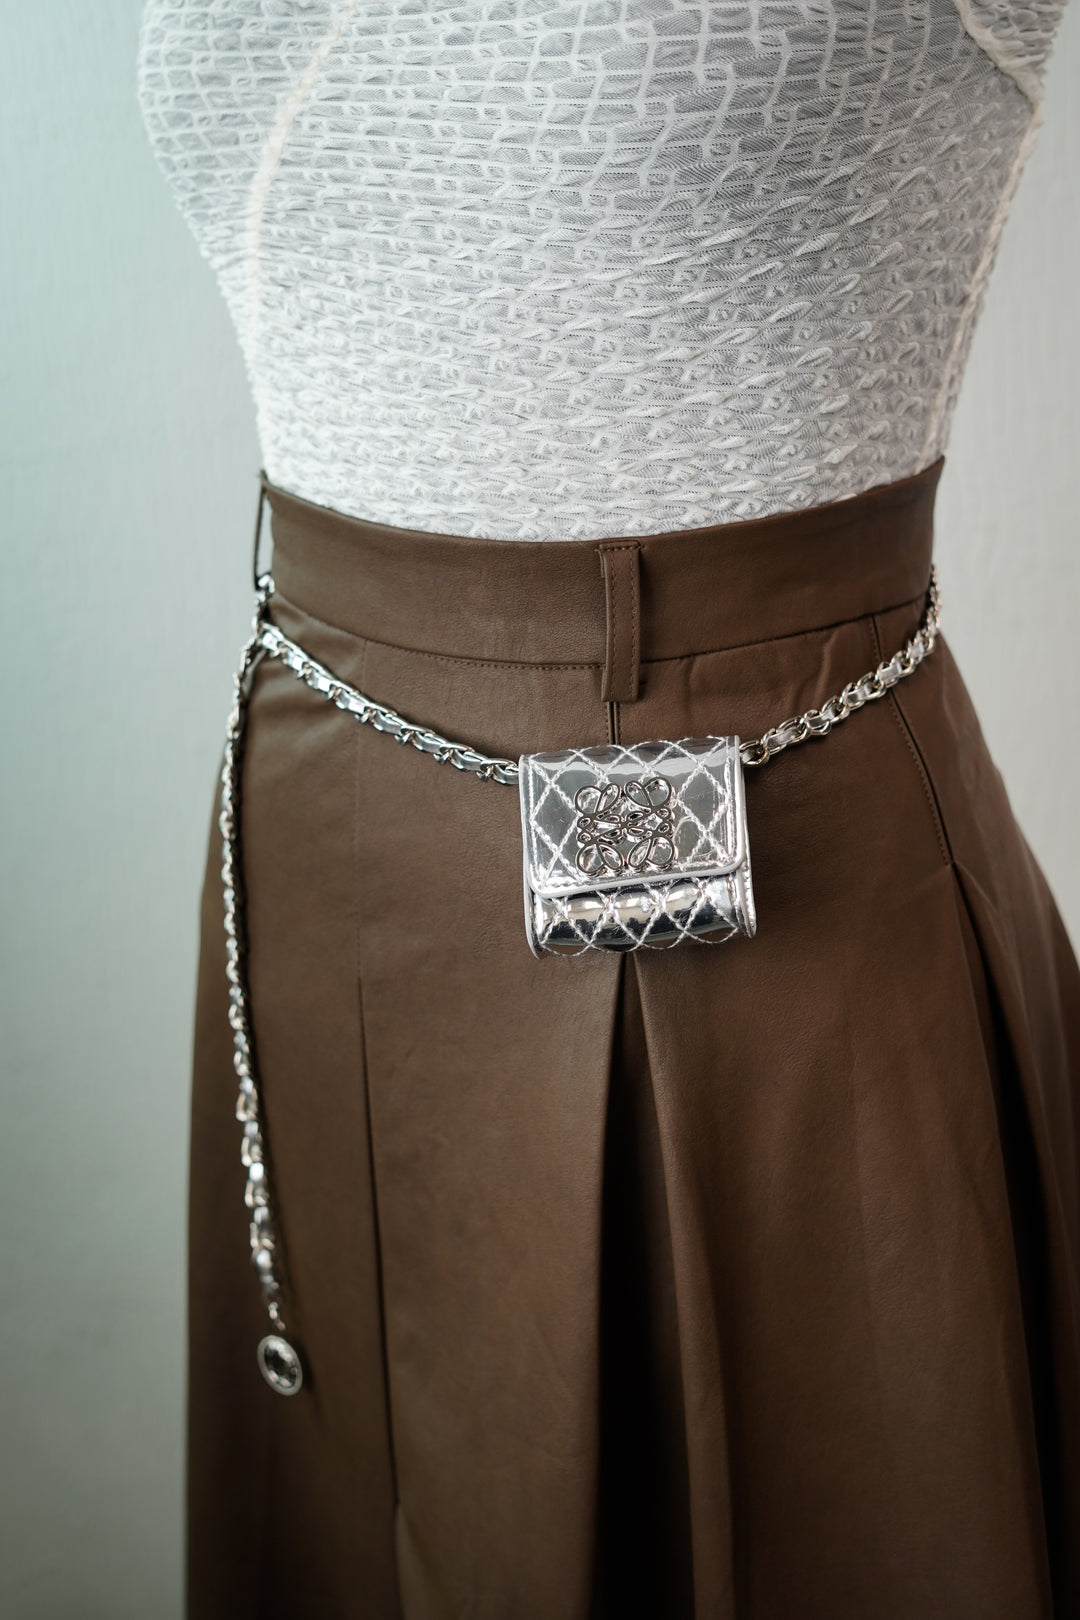 Chic Chain Waist Belt with Attached Mini Bag